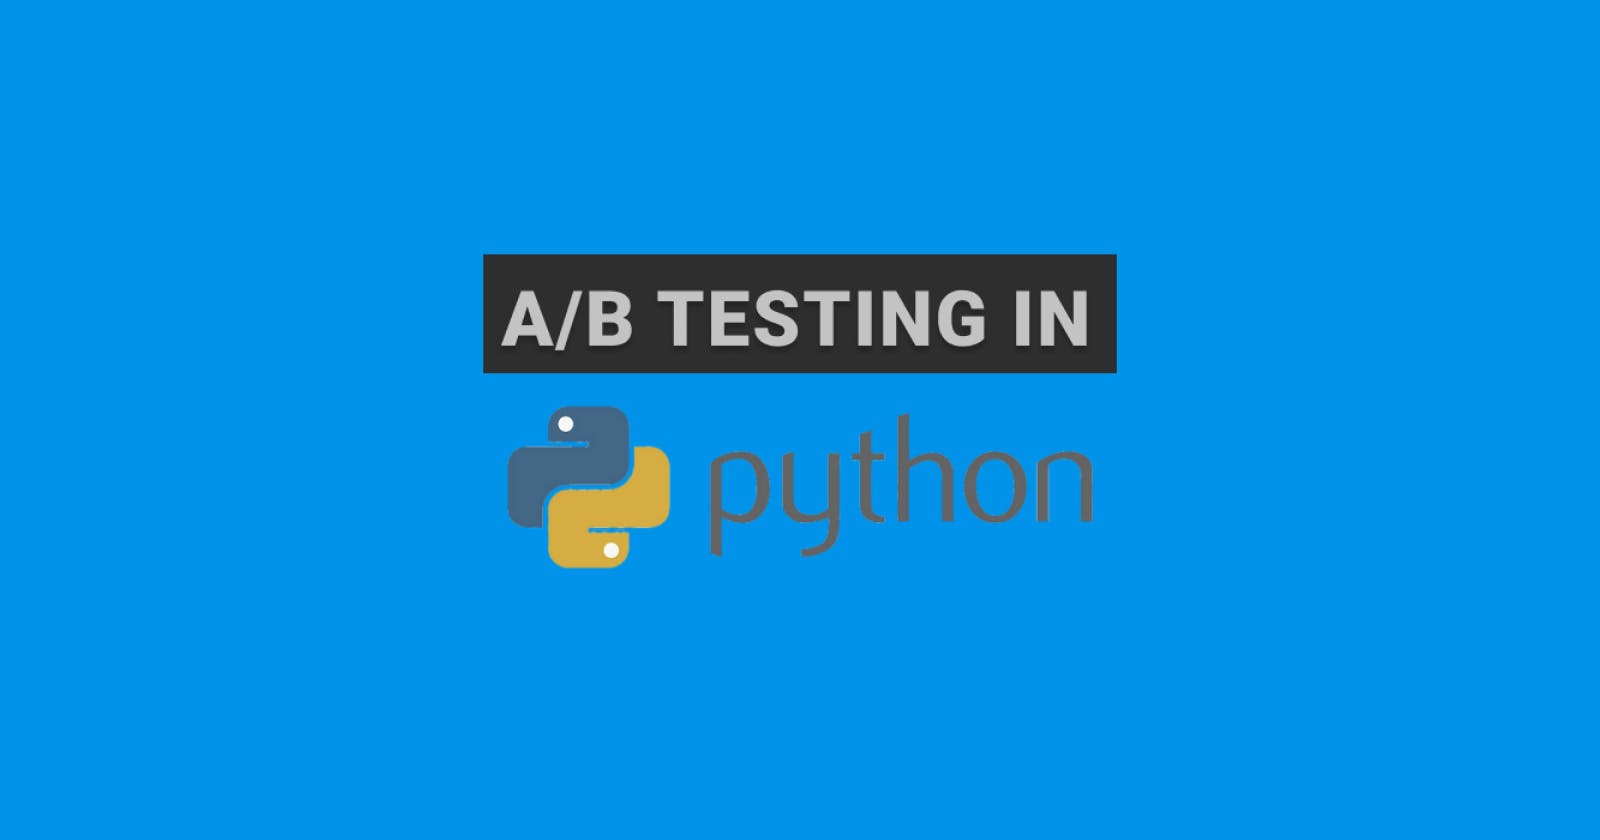 How to A/B test your Python application